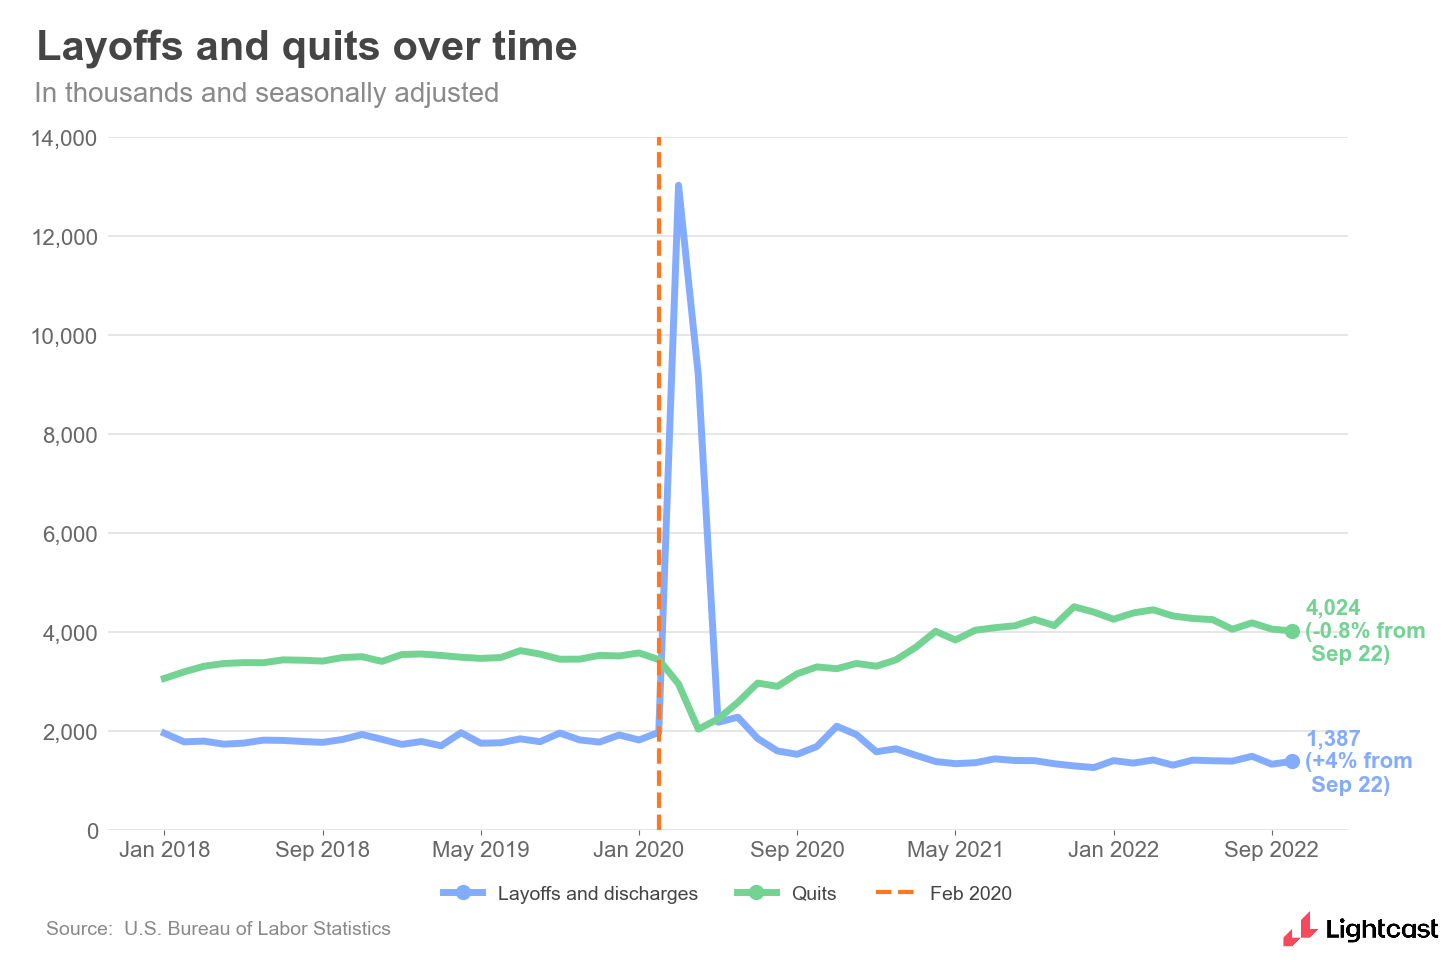 chart showing layoffs and quits over time